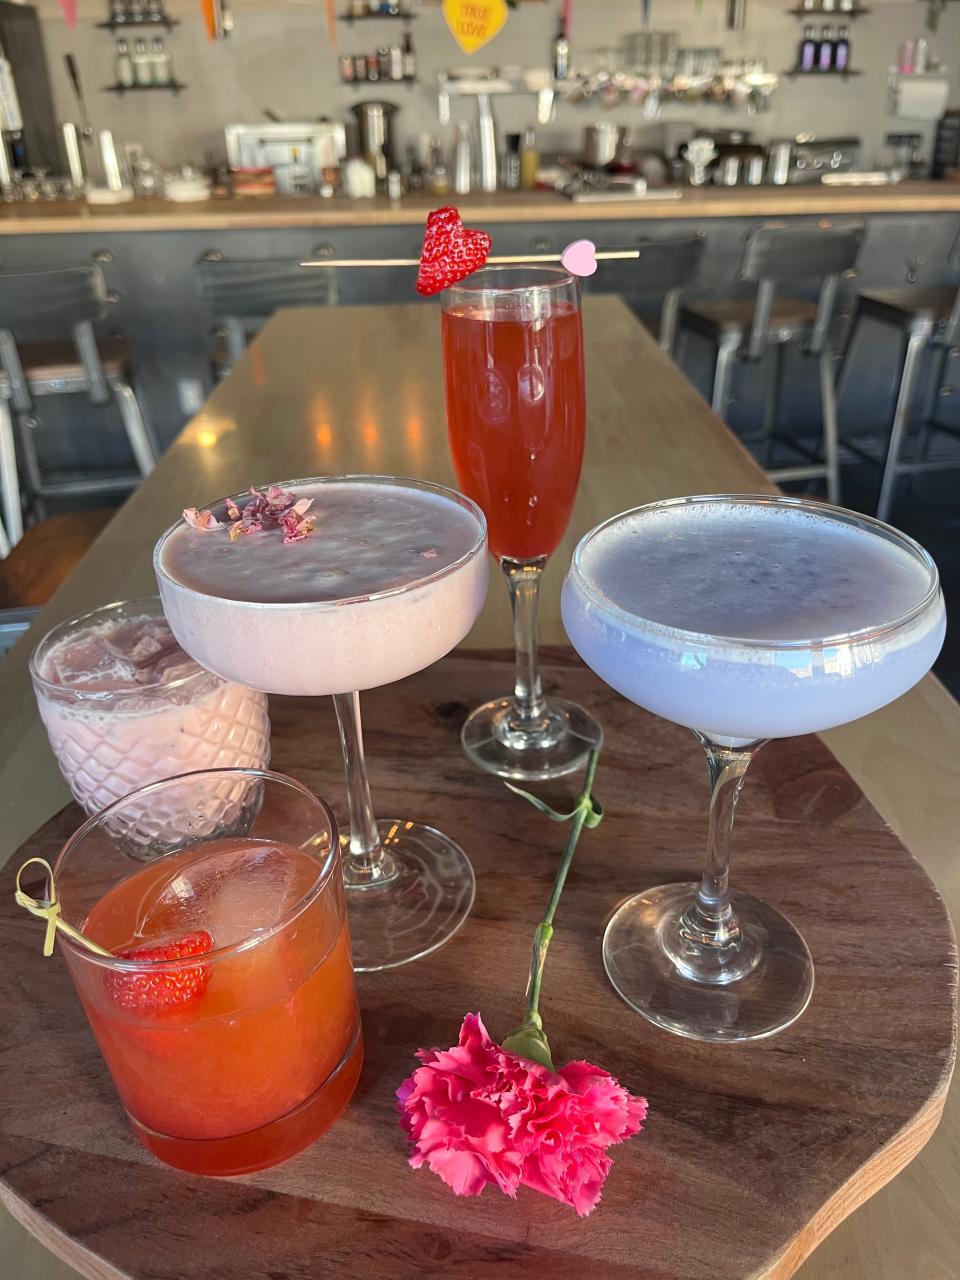 Hops and Hardware, in Bristol Borough, has a number of Valentine's Day-inspired cocktails this month, as well as a limited release of its Pink Bristol Cream.